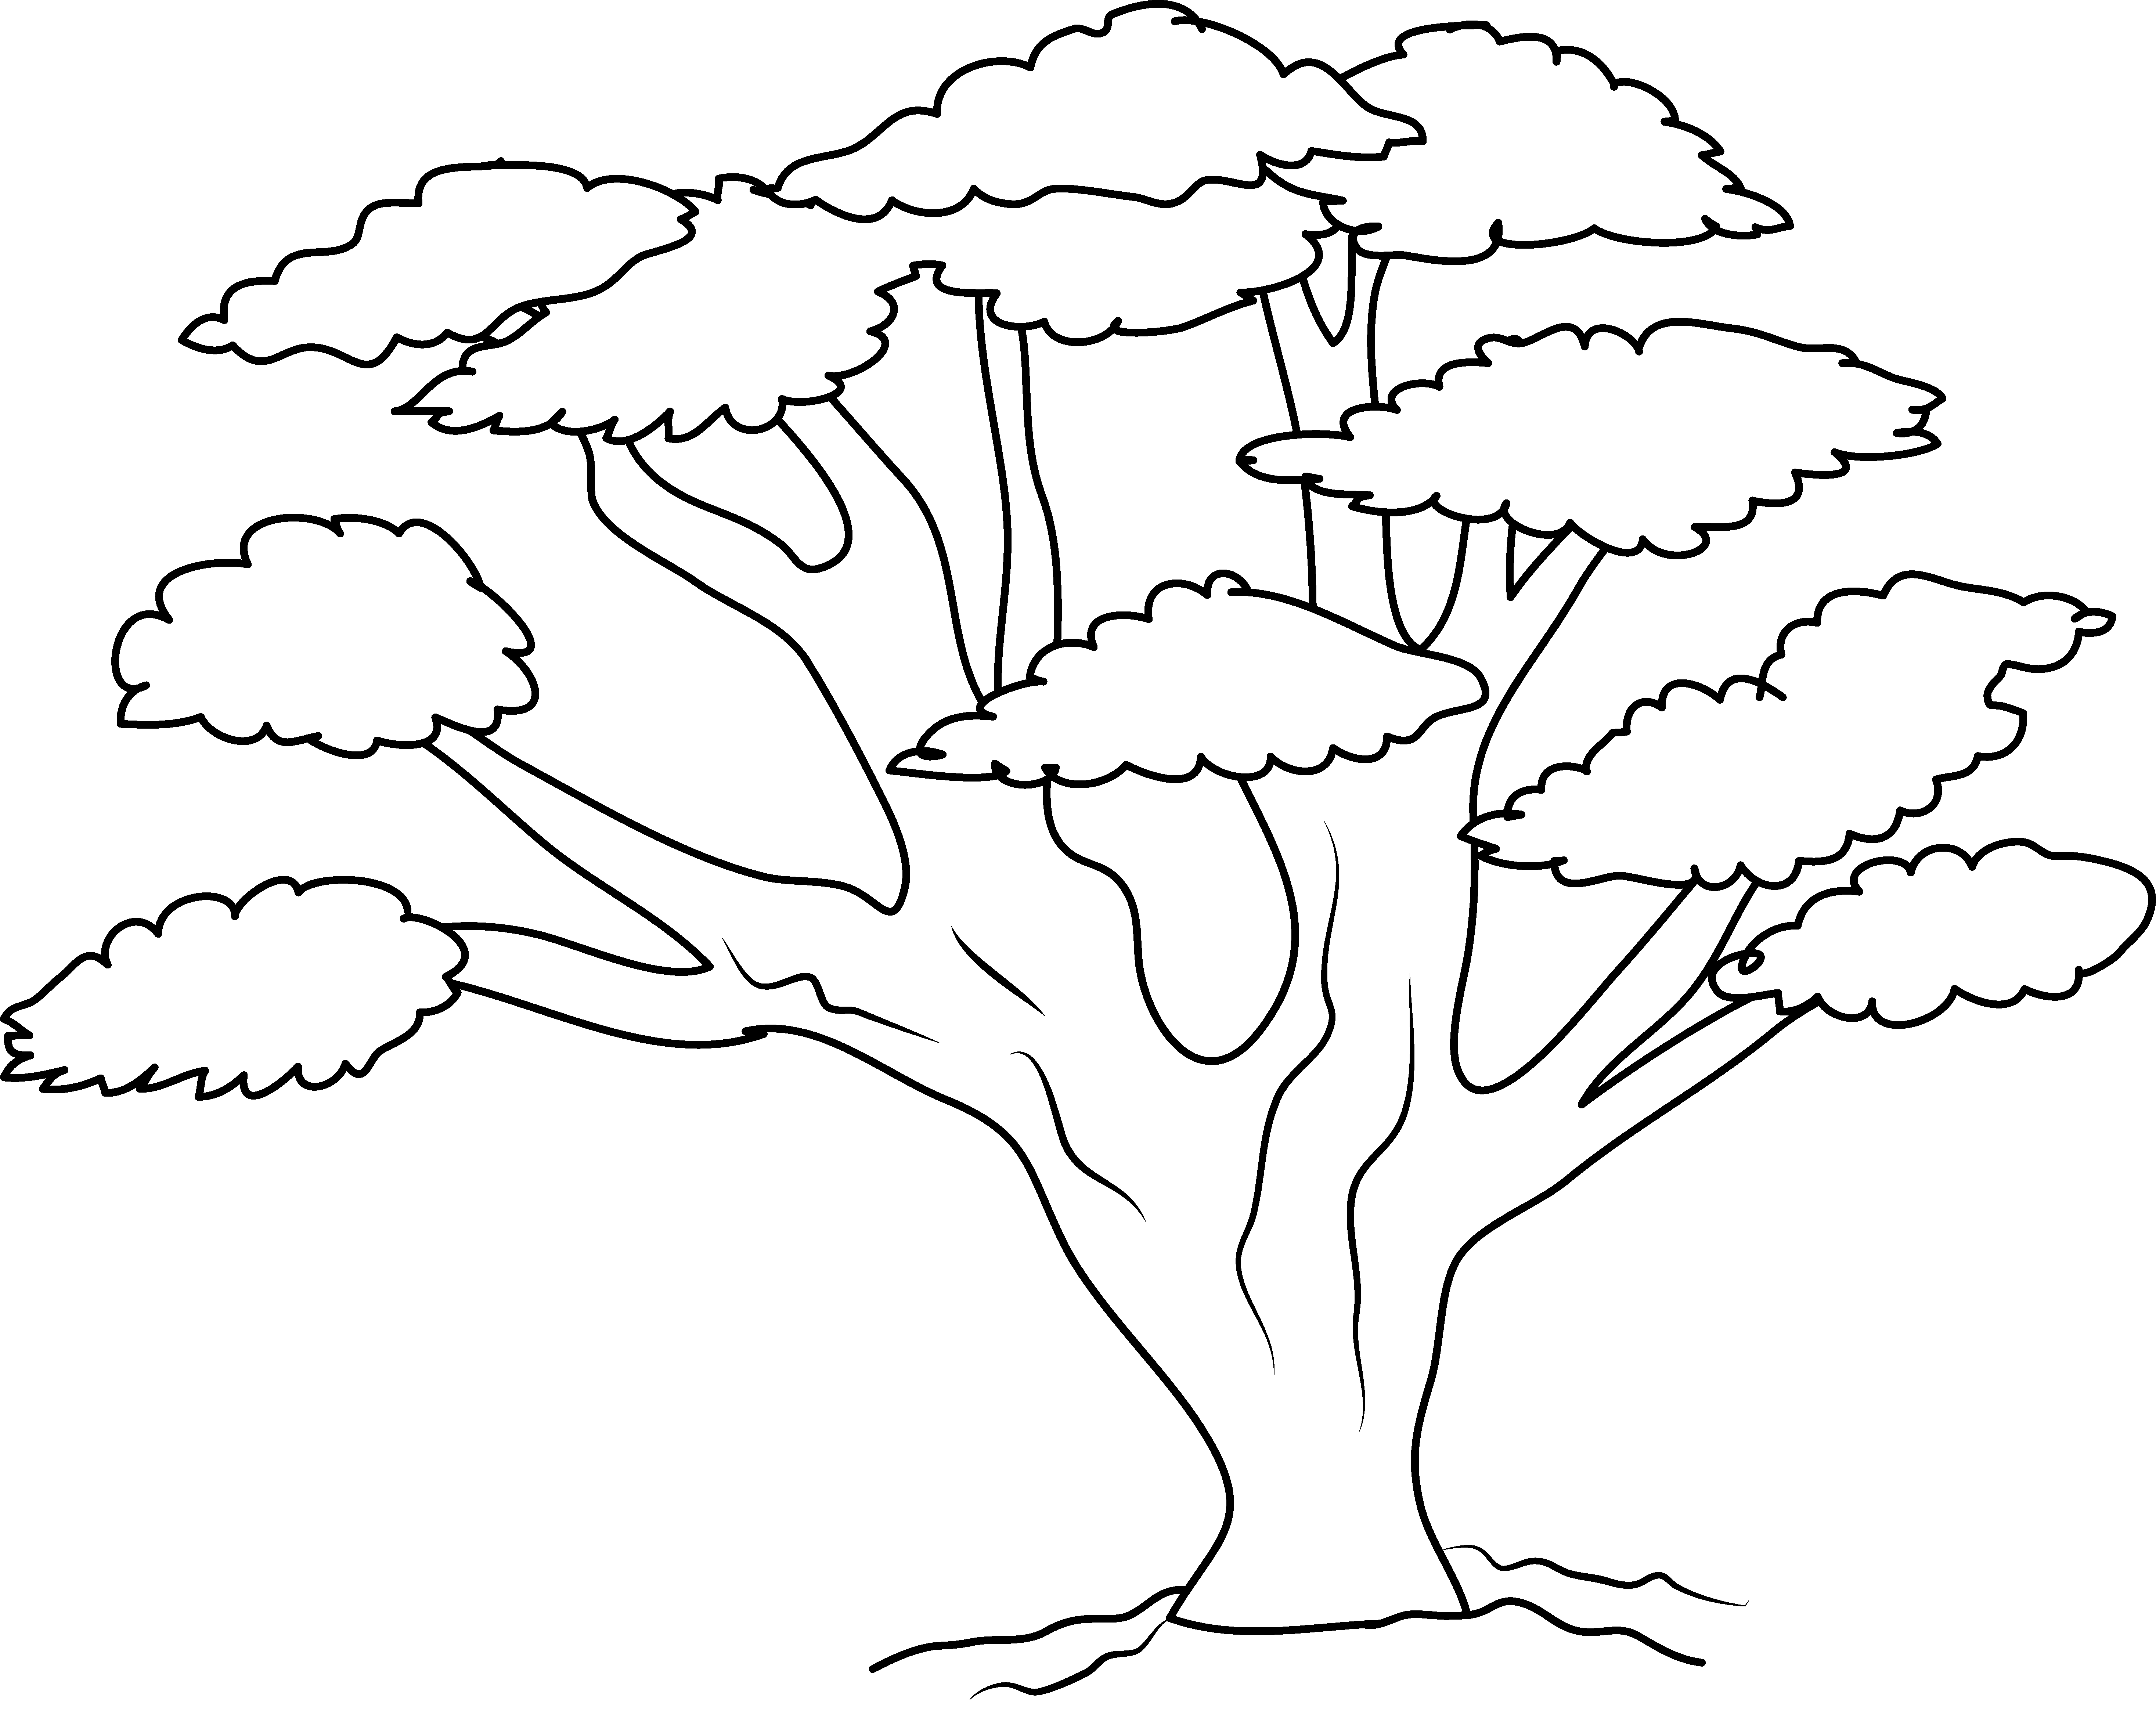 tree images for colouring christmas tree coloring page free printable coloring pages colouring tree images for 